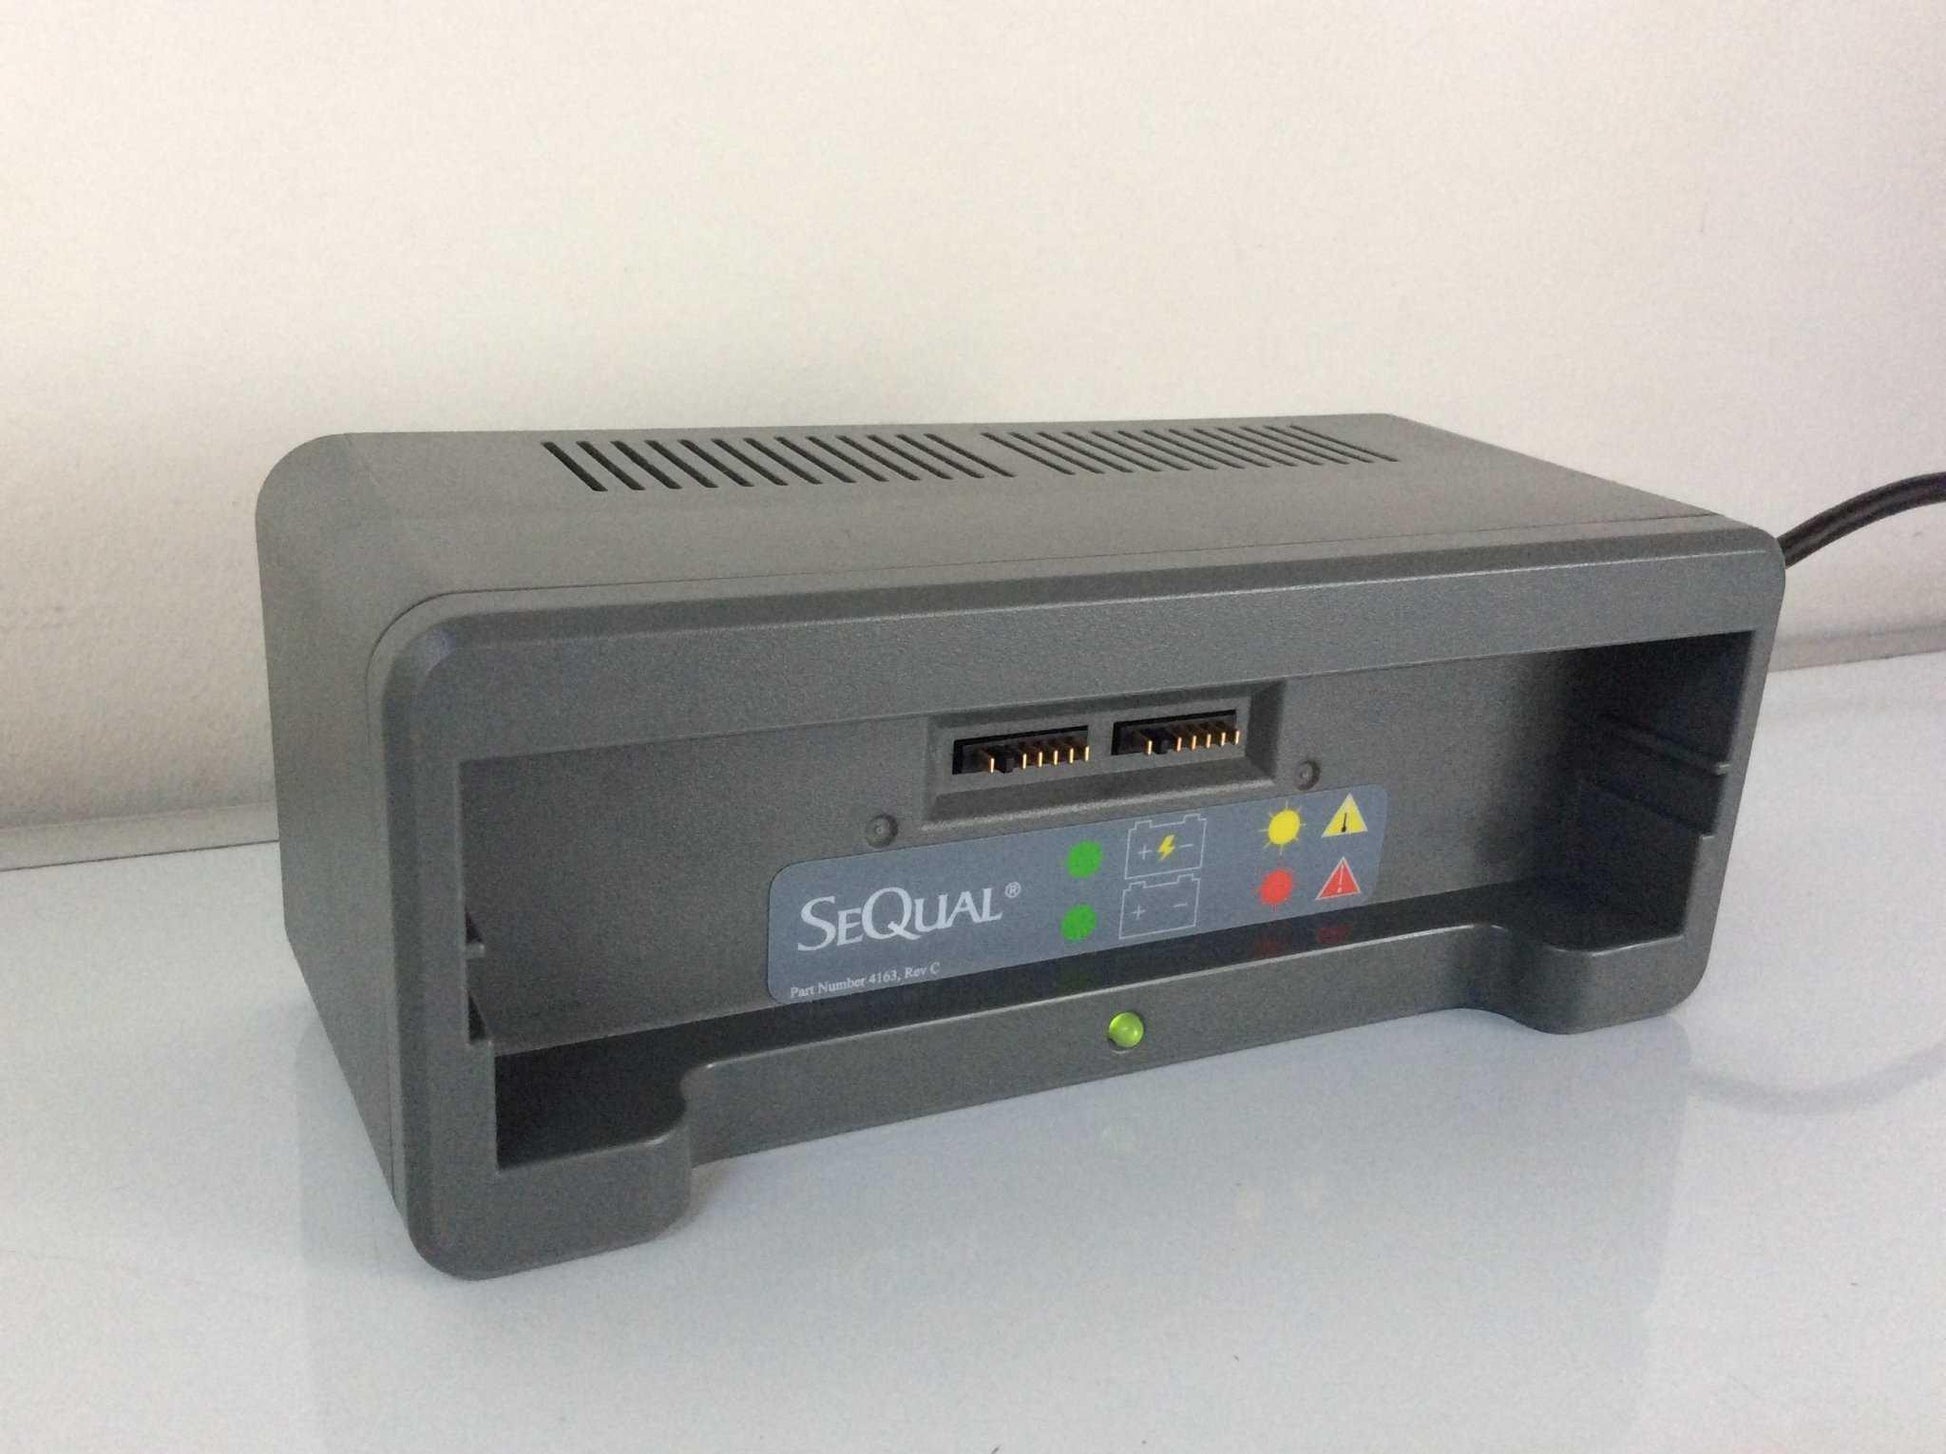 USED SeQual Eclipse Desktop External Battery Charger with Cord 3823 4162 4163 Warranty FREE Shipping - MBR Medicals